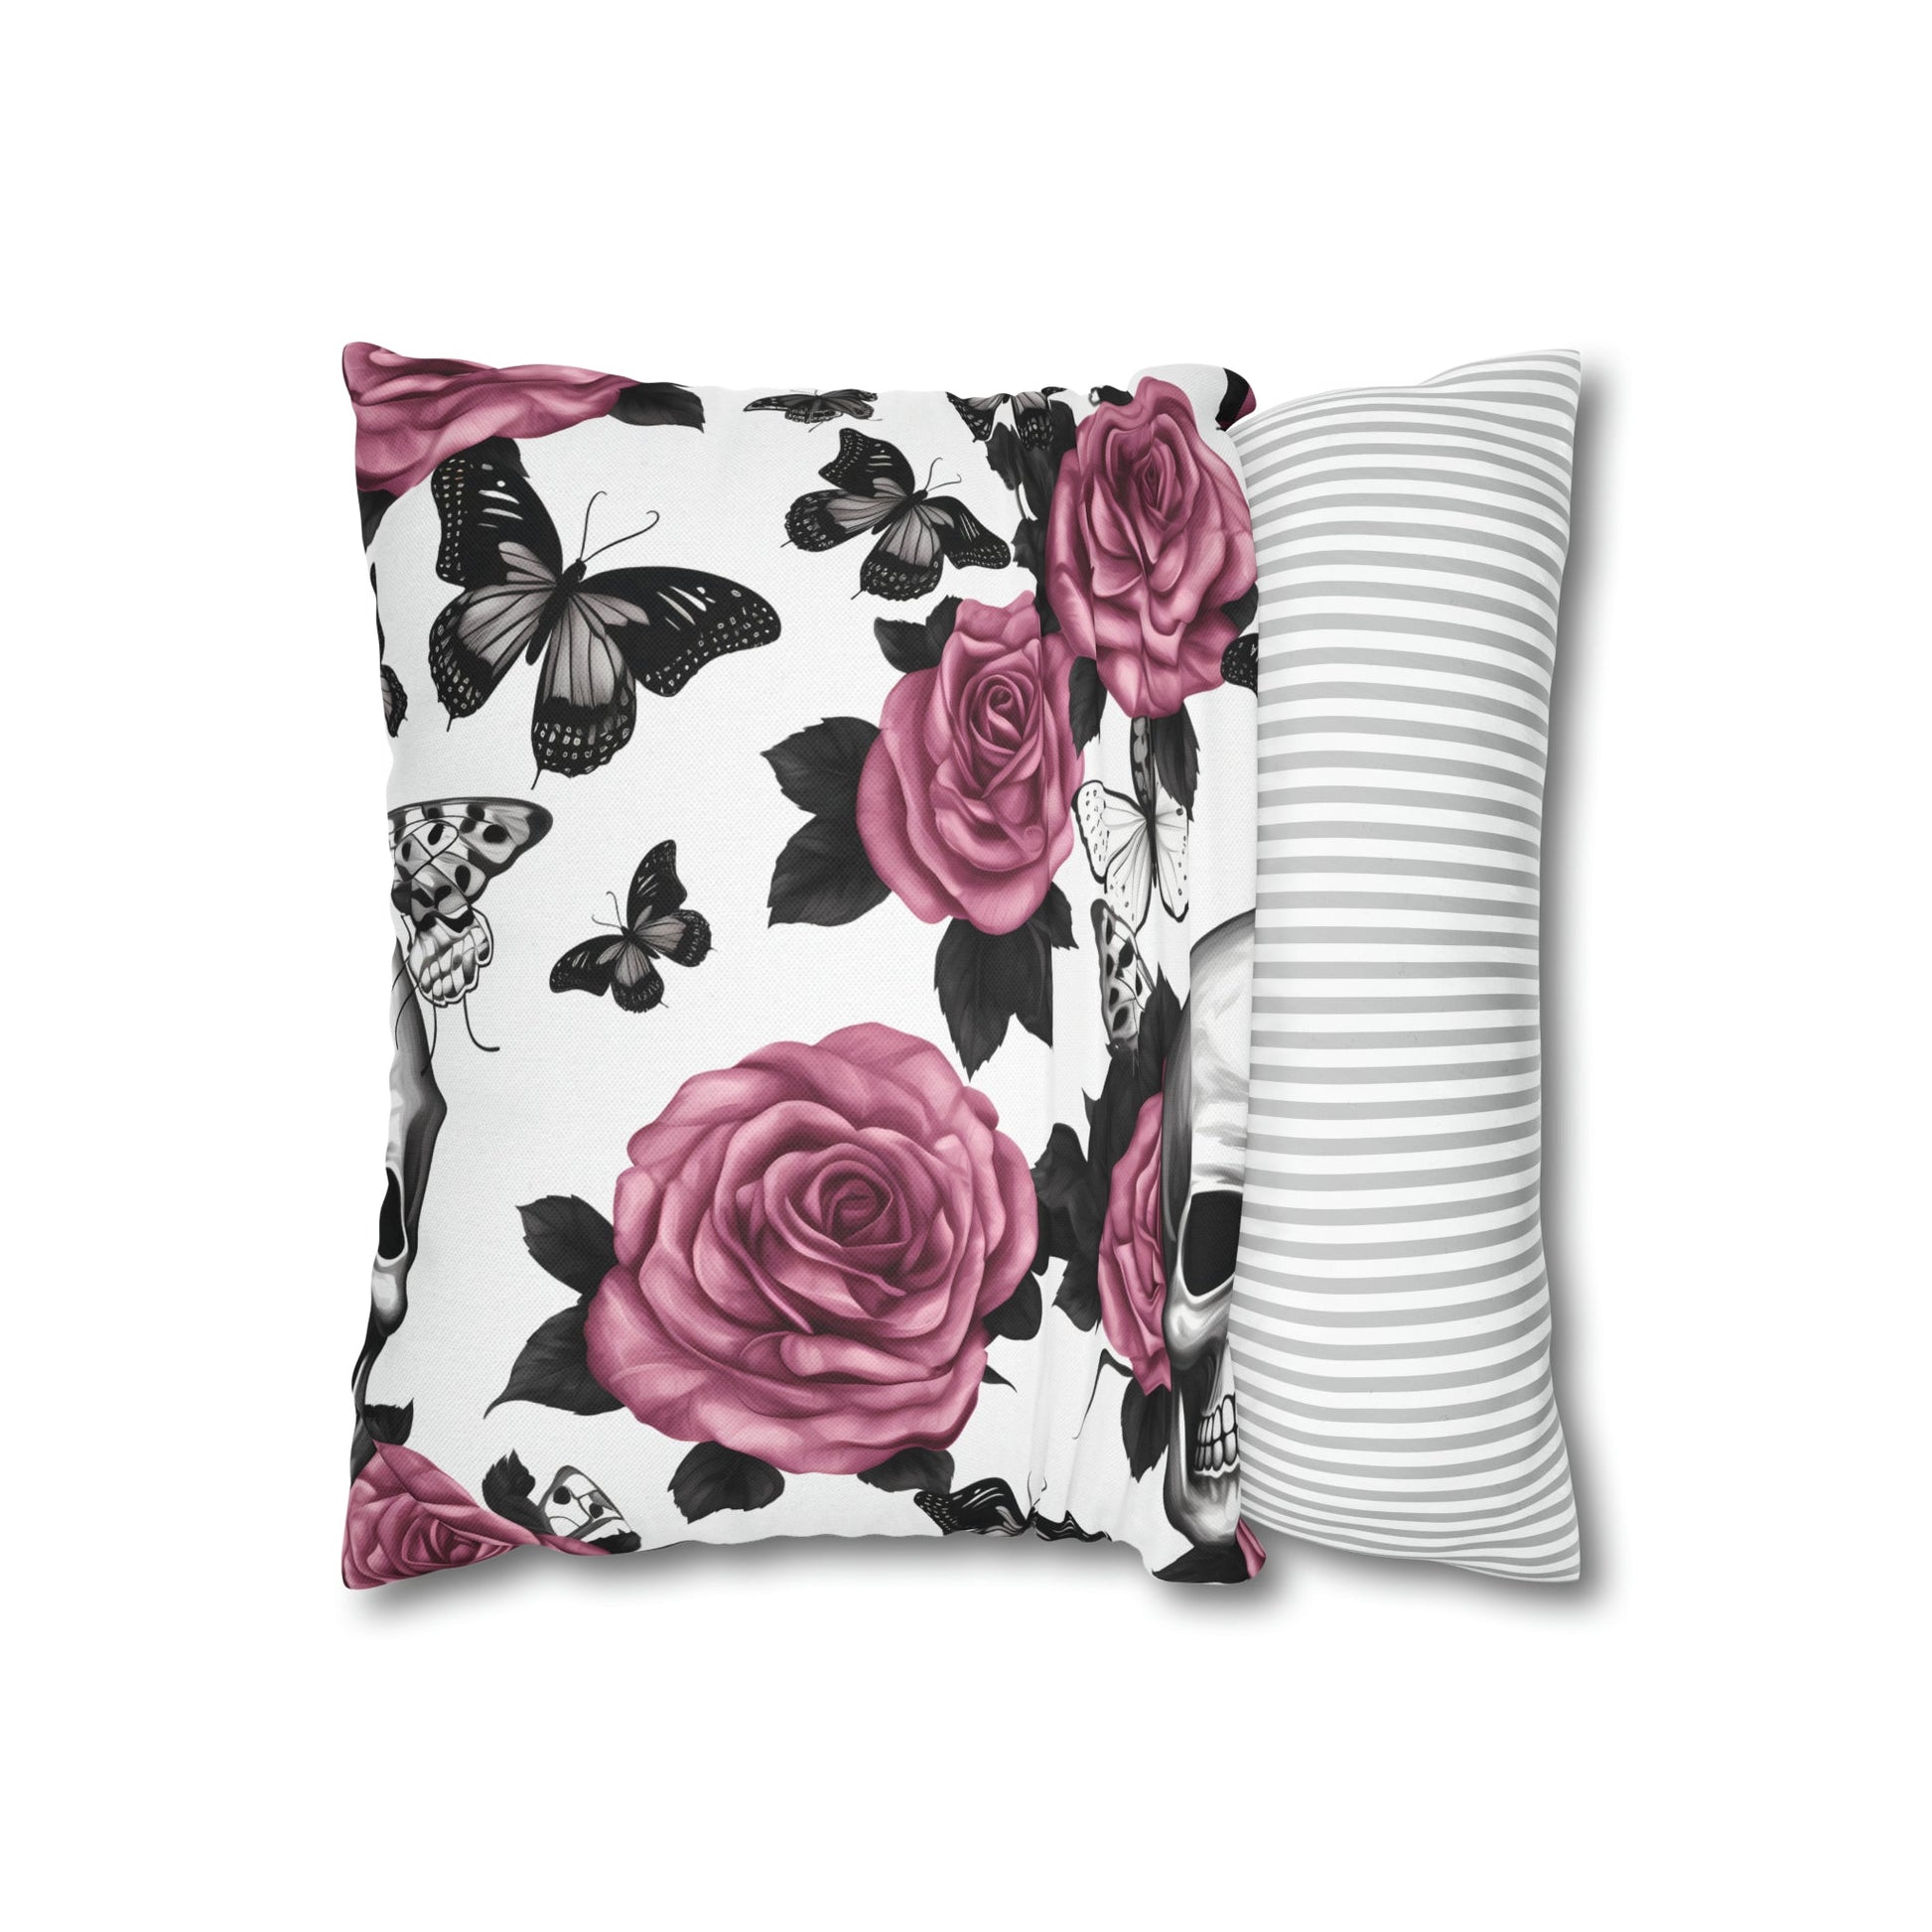 Skulls Pink Roses and Black Butterflies Square Pillow CaseHome DecorVTZdesigns18" × 18"All Over PrintAOPBed